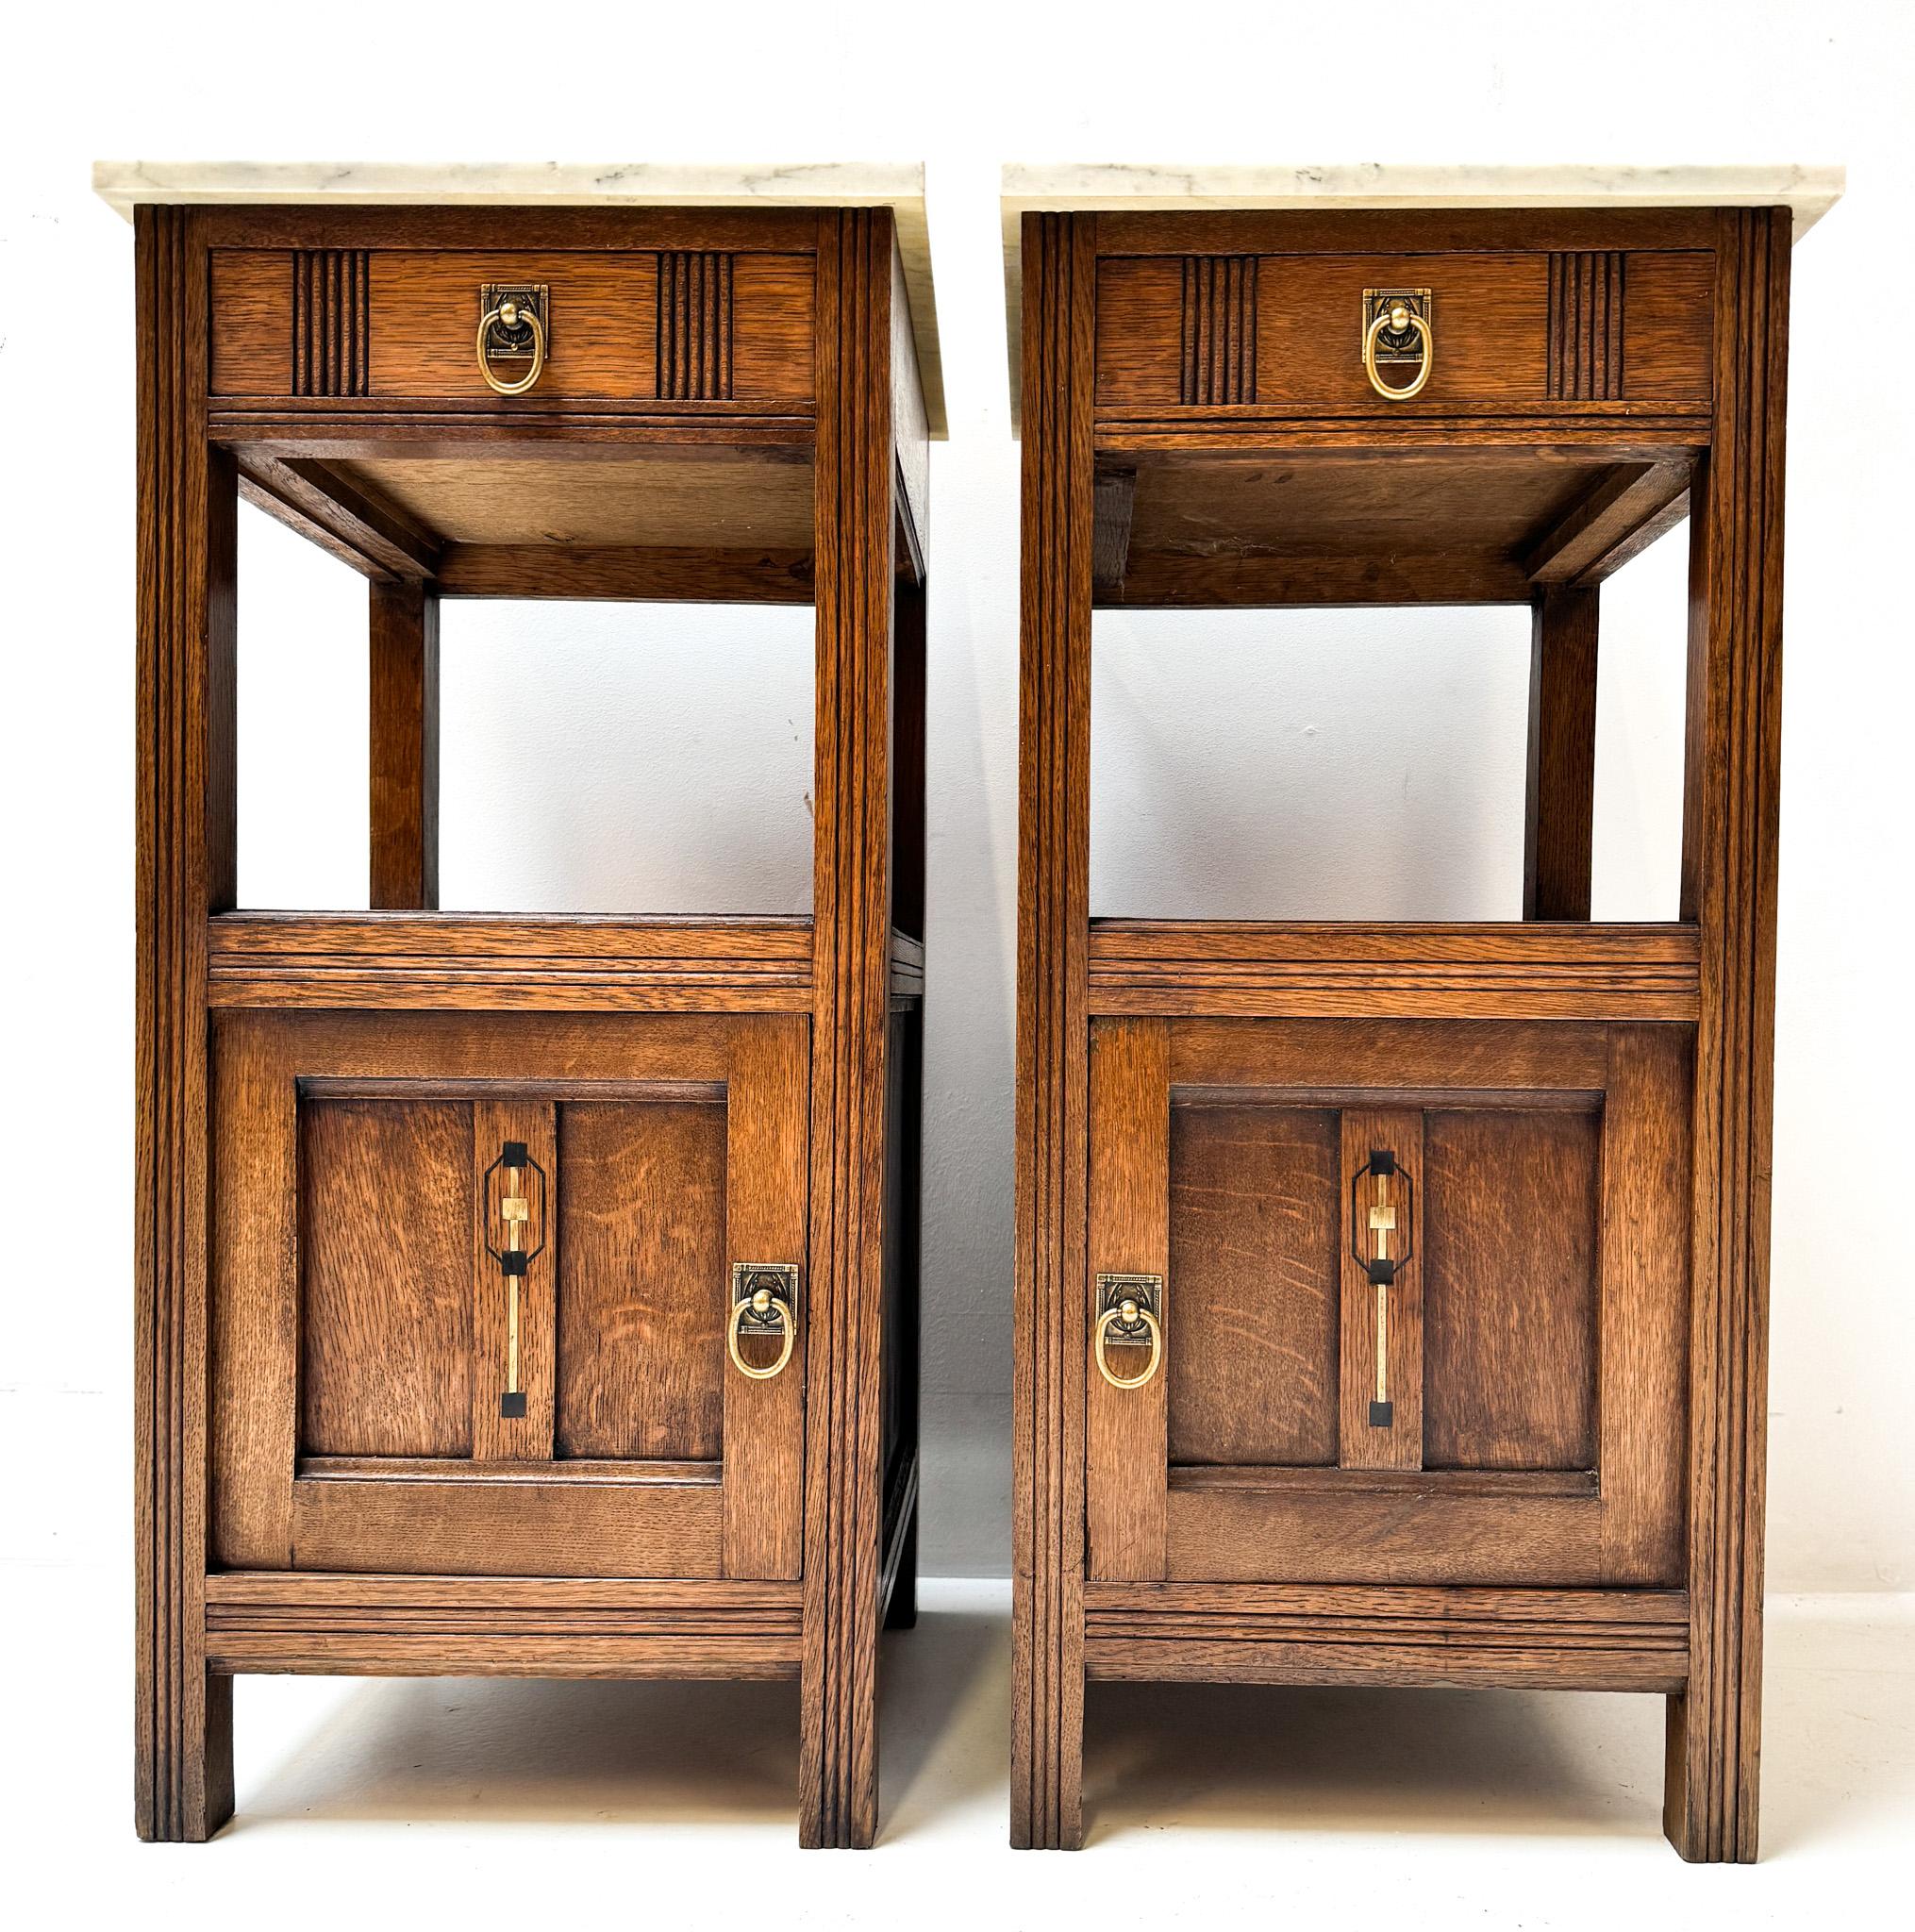 Stunning and elegant pair of Art Nouveau nightstands or bedside tables.
Striking French design from the 1900s.
Solid oak base with brass handles door and drawer.
Original white marble tops.
This wonderful pair of Art Nouveau nightstands or bedside